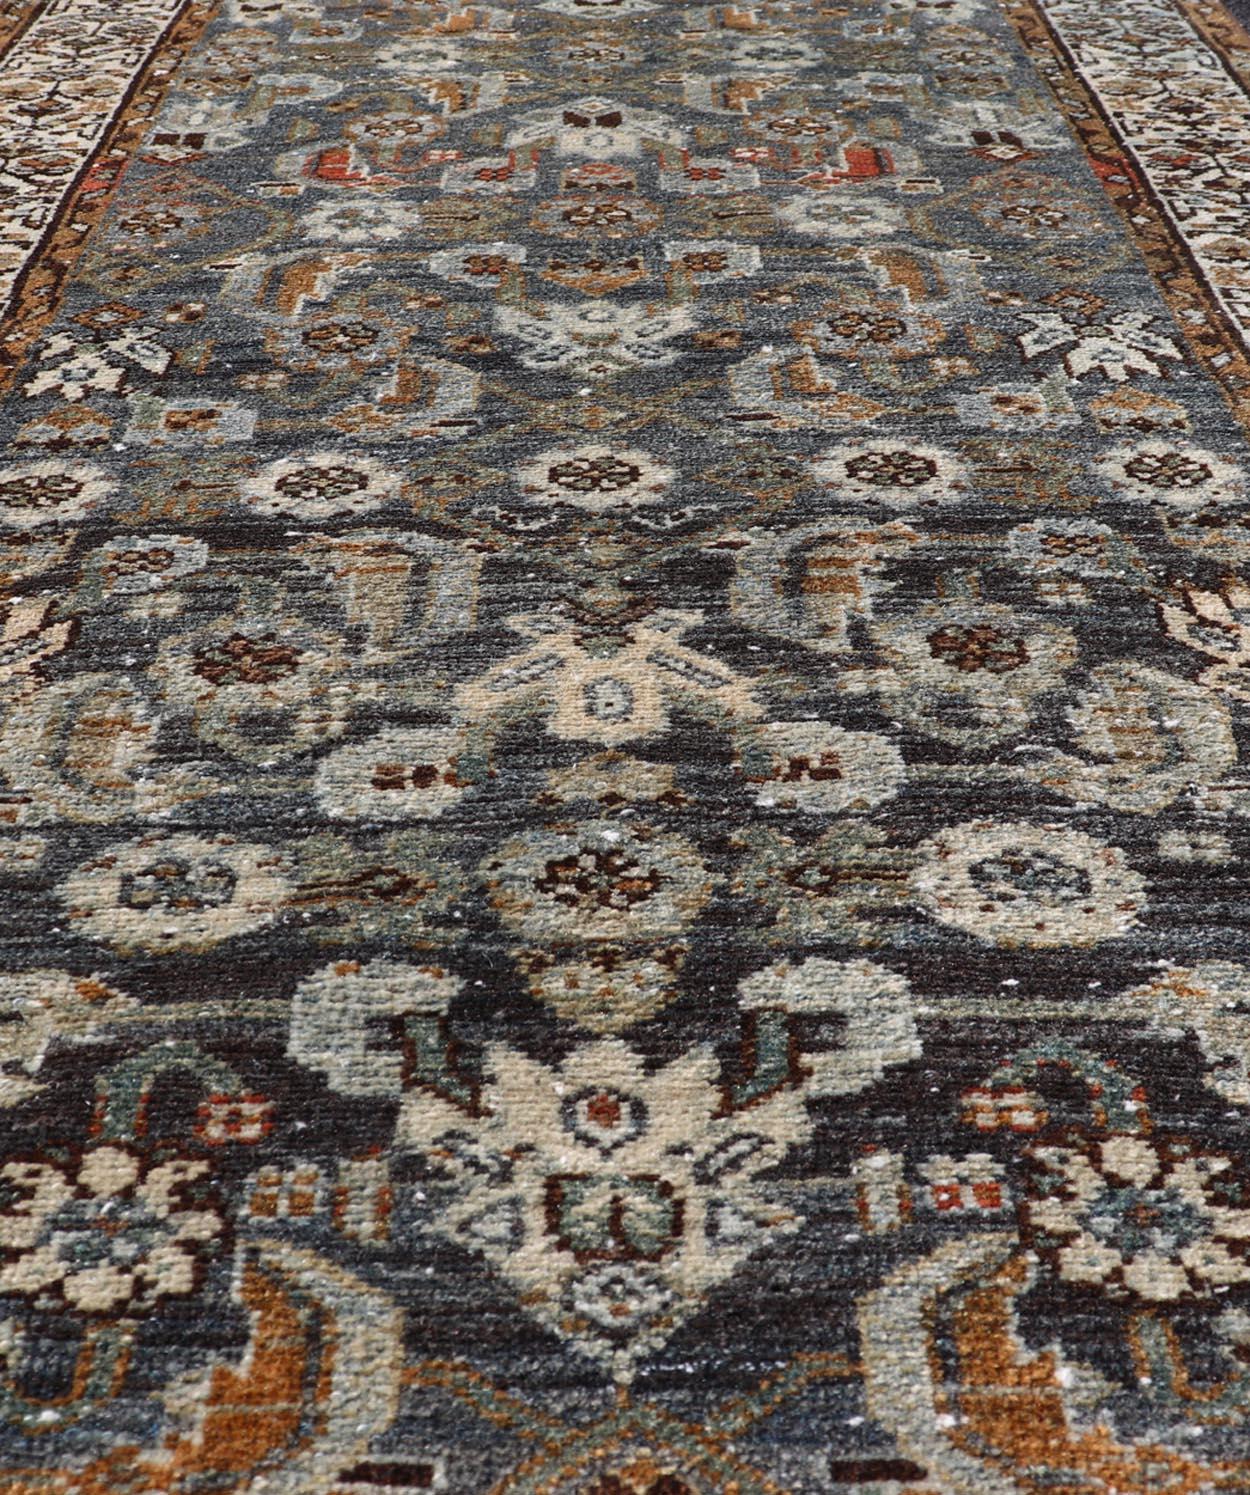 Antique Persian Malayer Rug with All-Over Tribal Design On A Blue Field  4